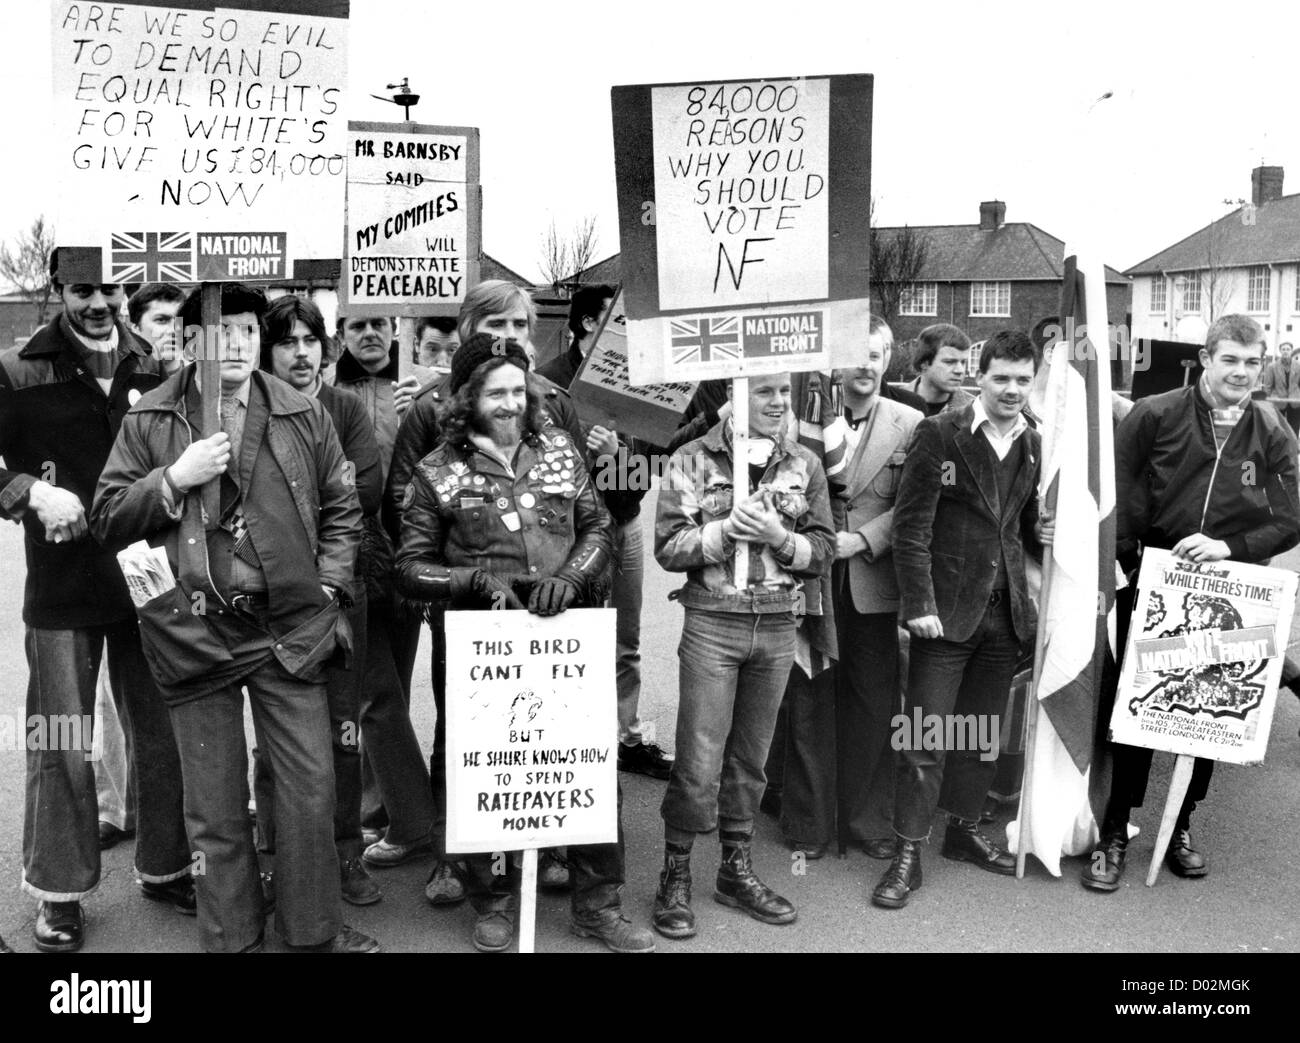 National Front march in Wolverhampton 1981. Britain British England English 1980s politics political rally action far right working class street streets protest Uk Stock Photo